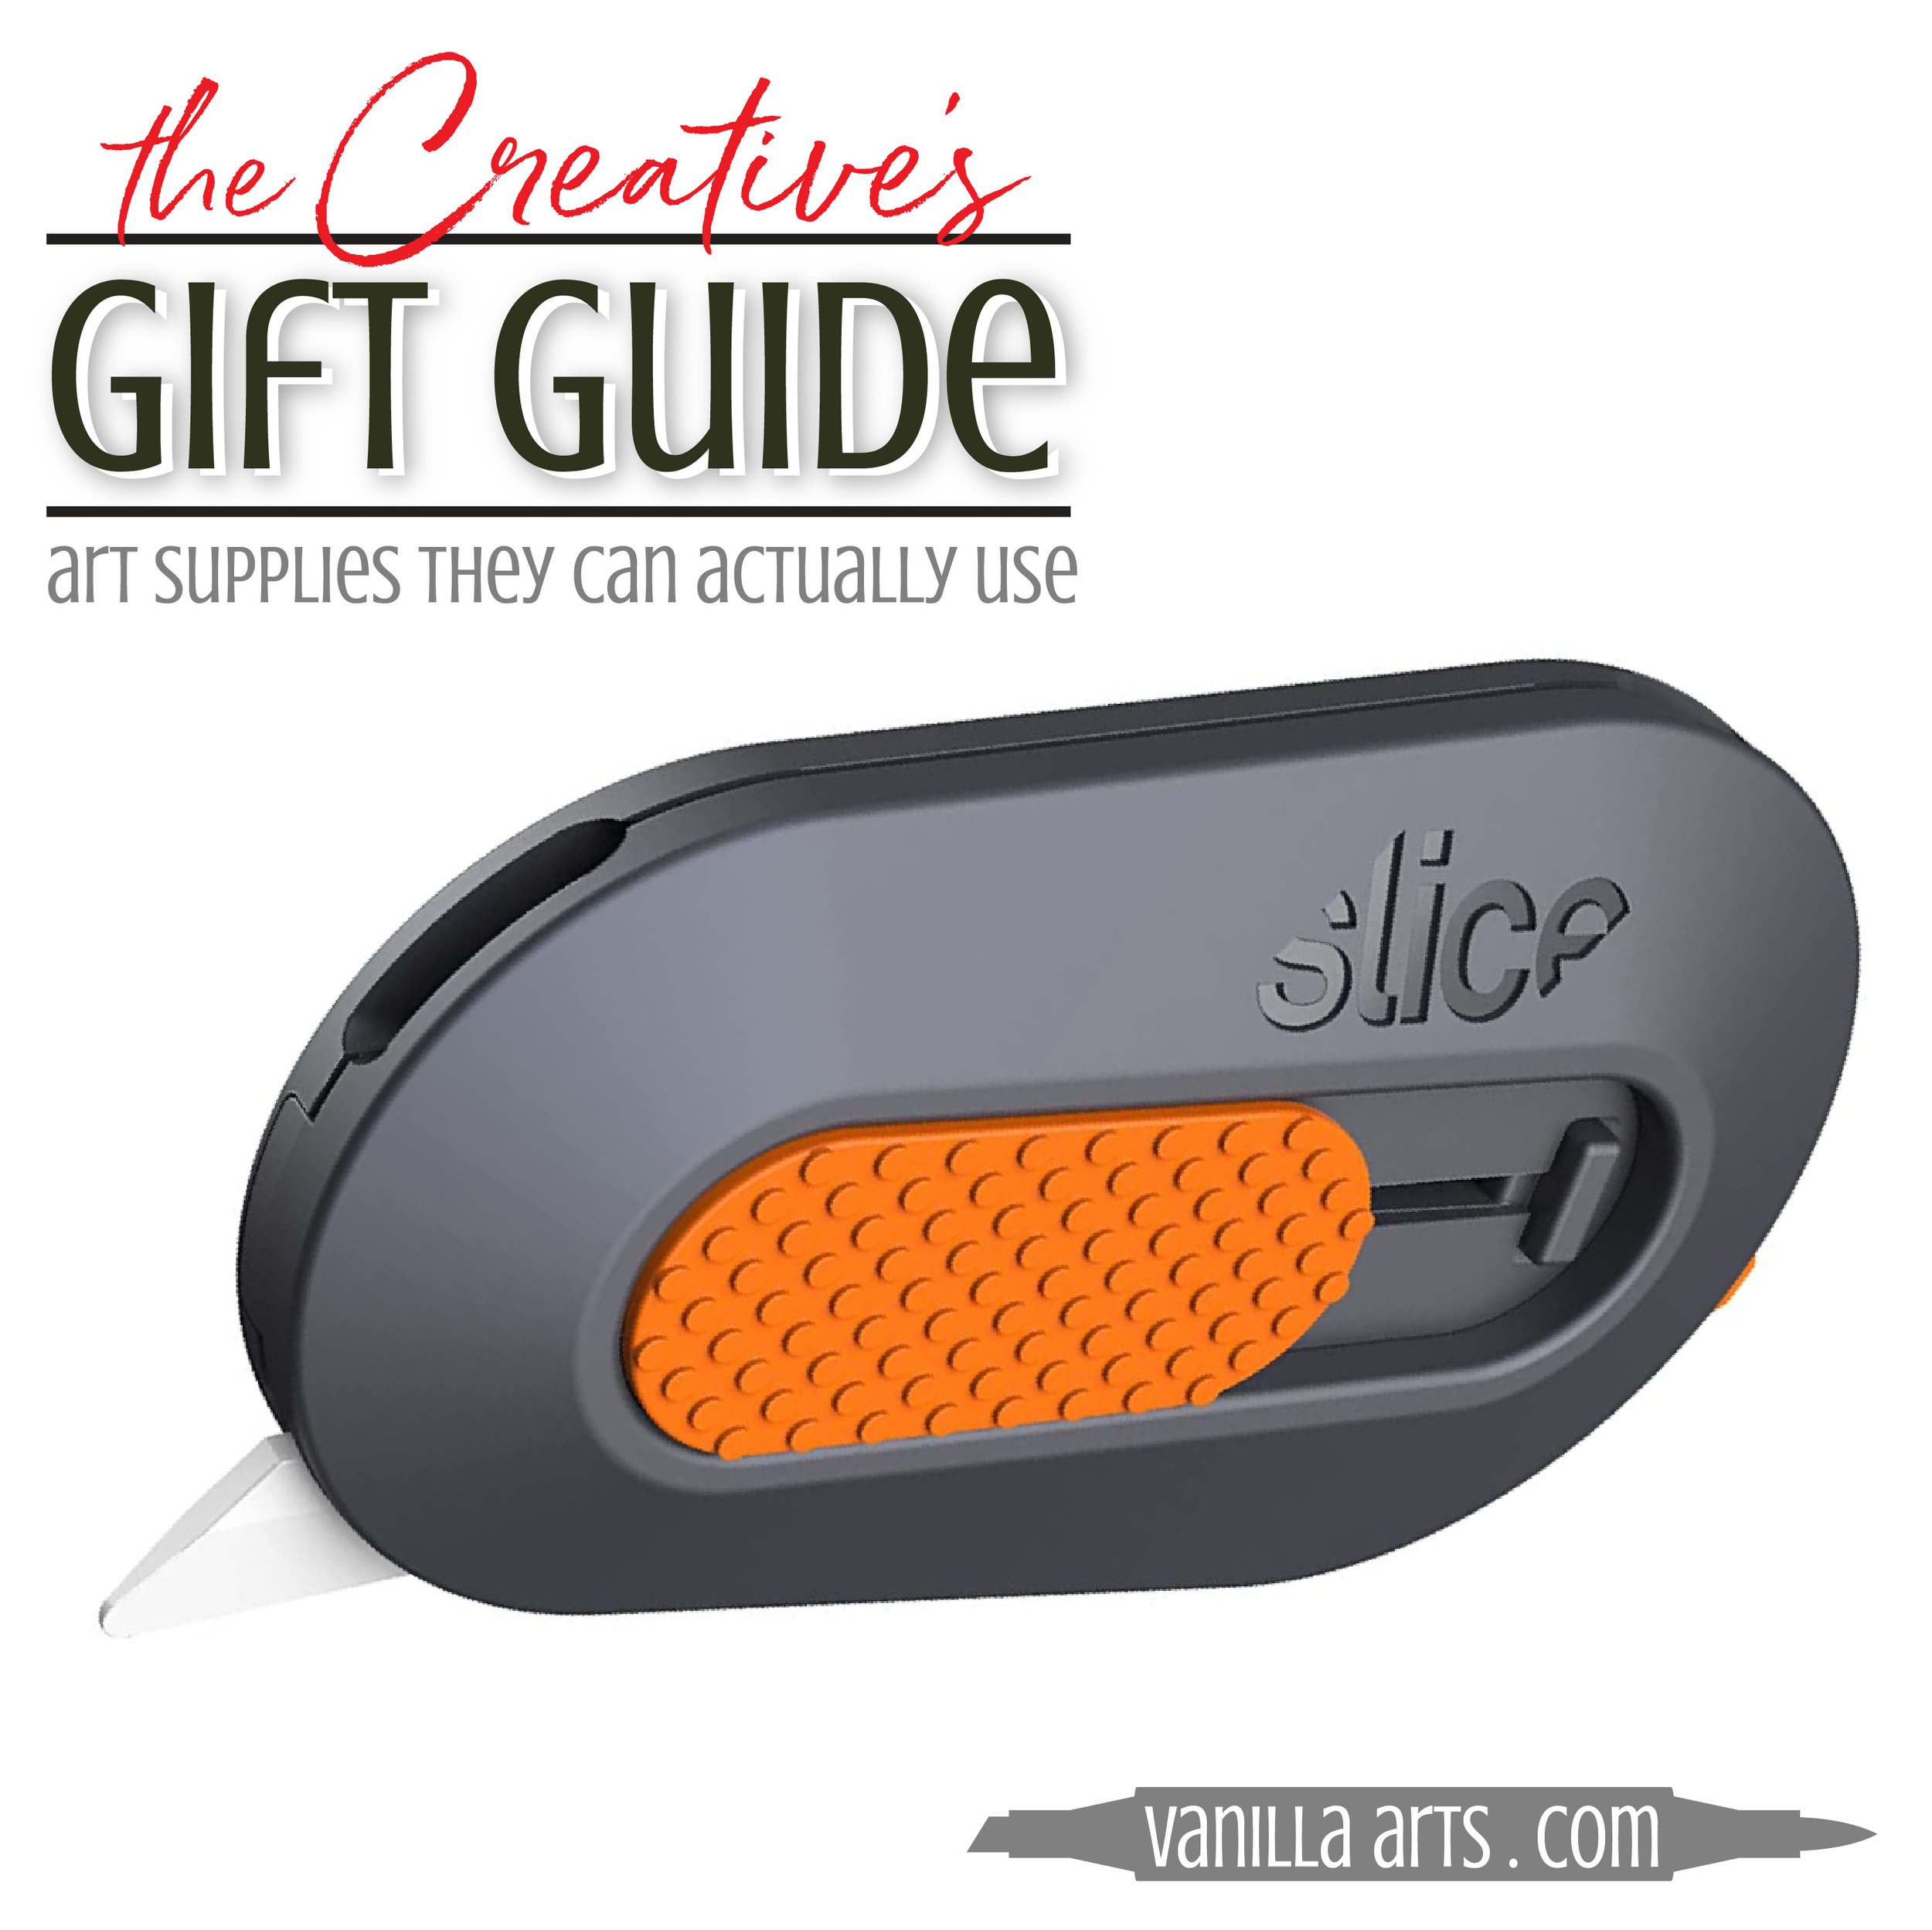 The Creative's Gift Guide: Best Art Supplies of the Year - 2022